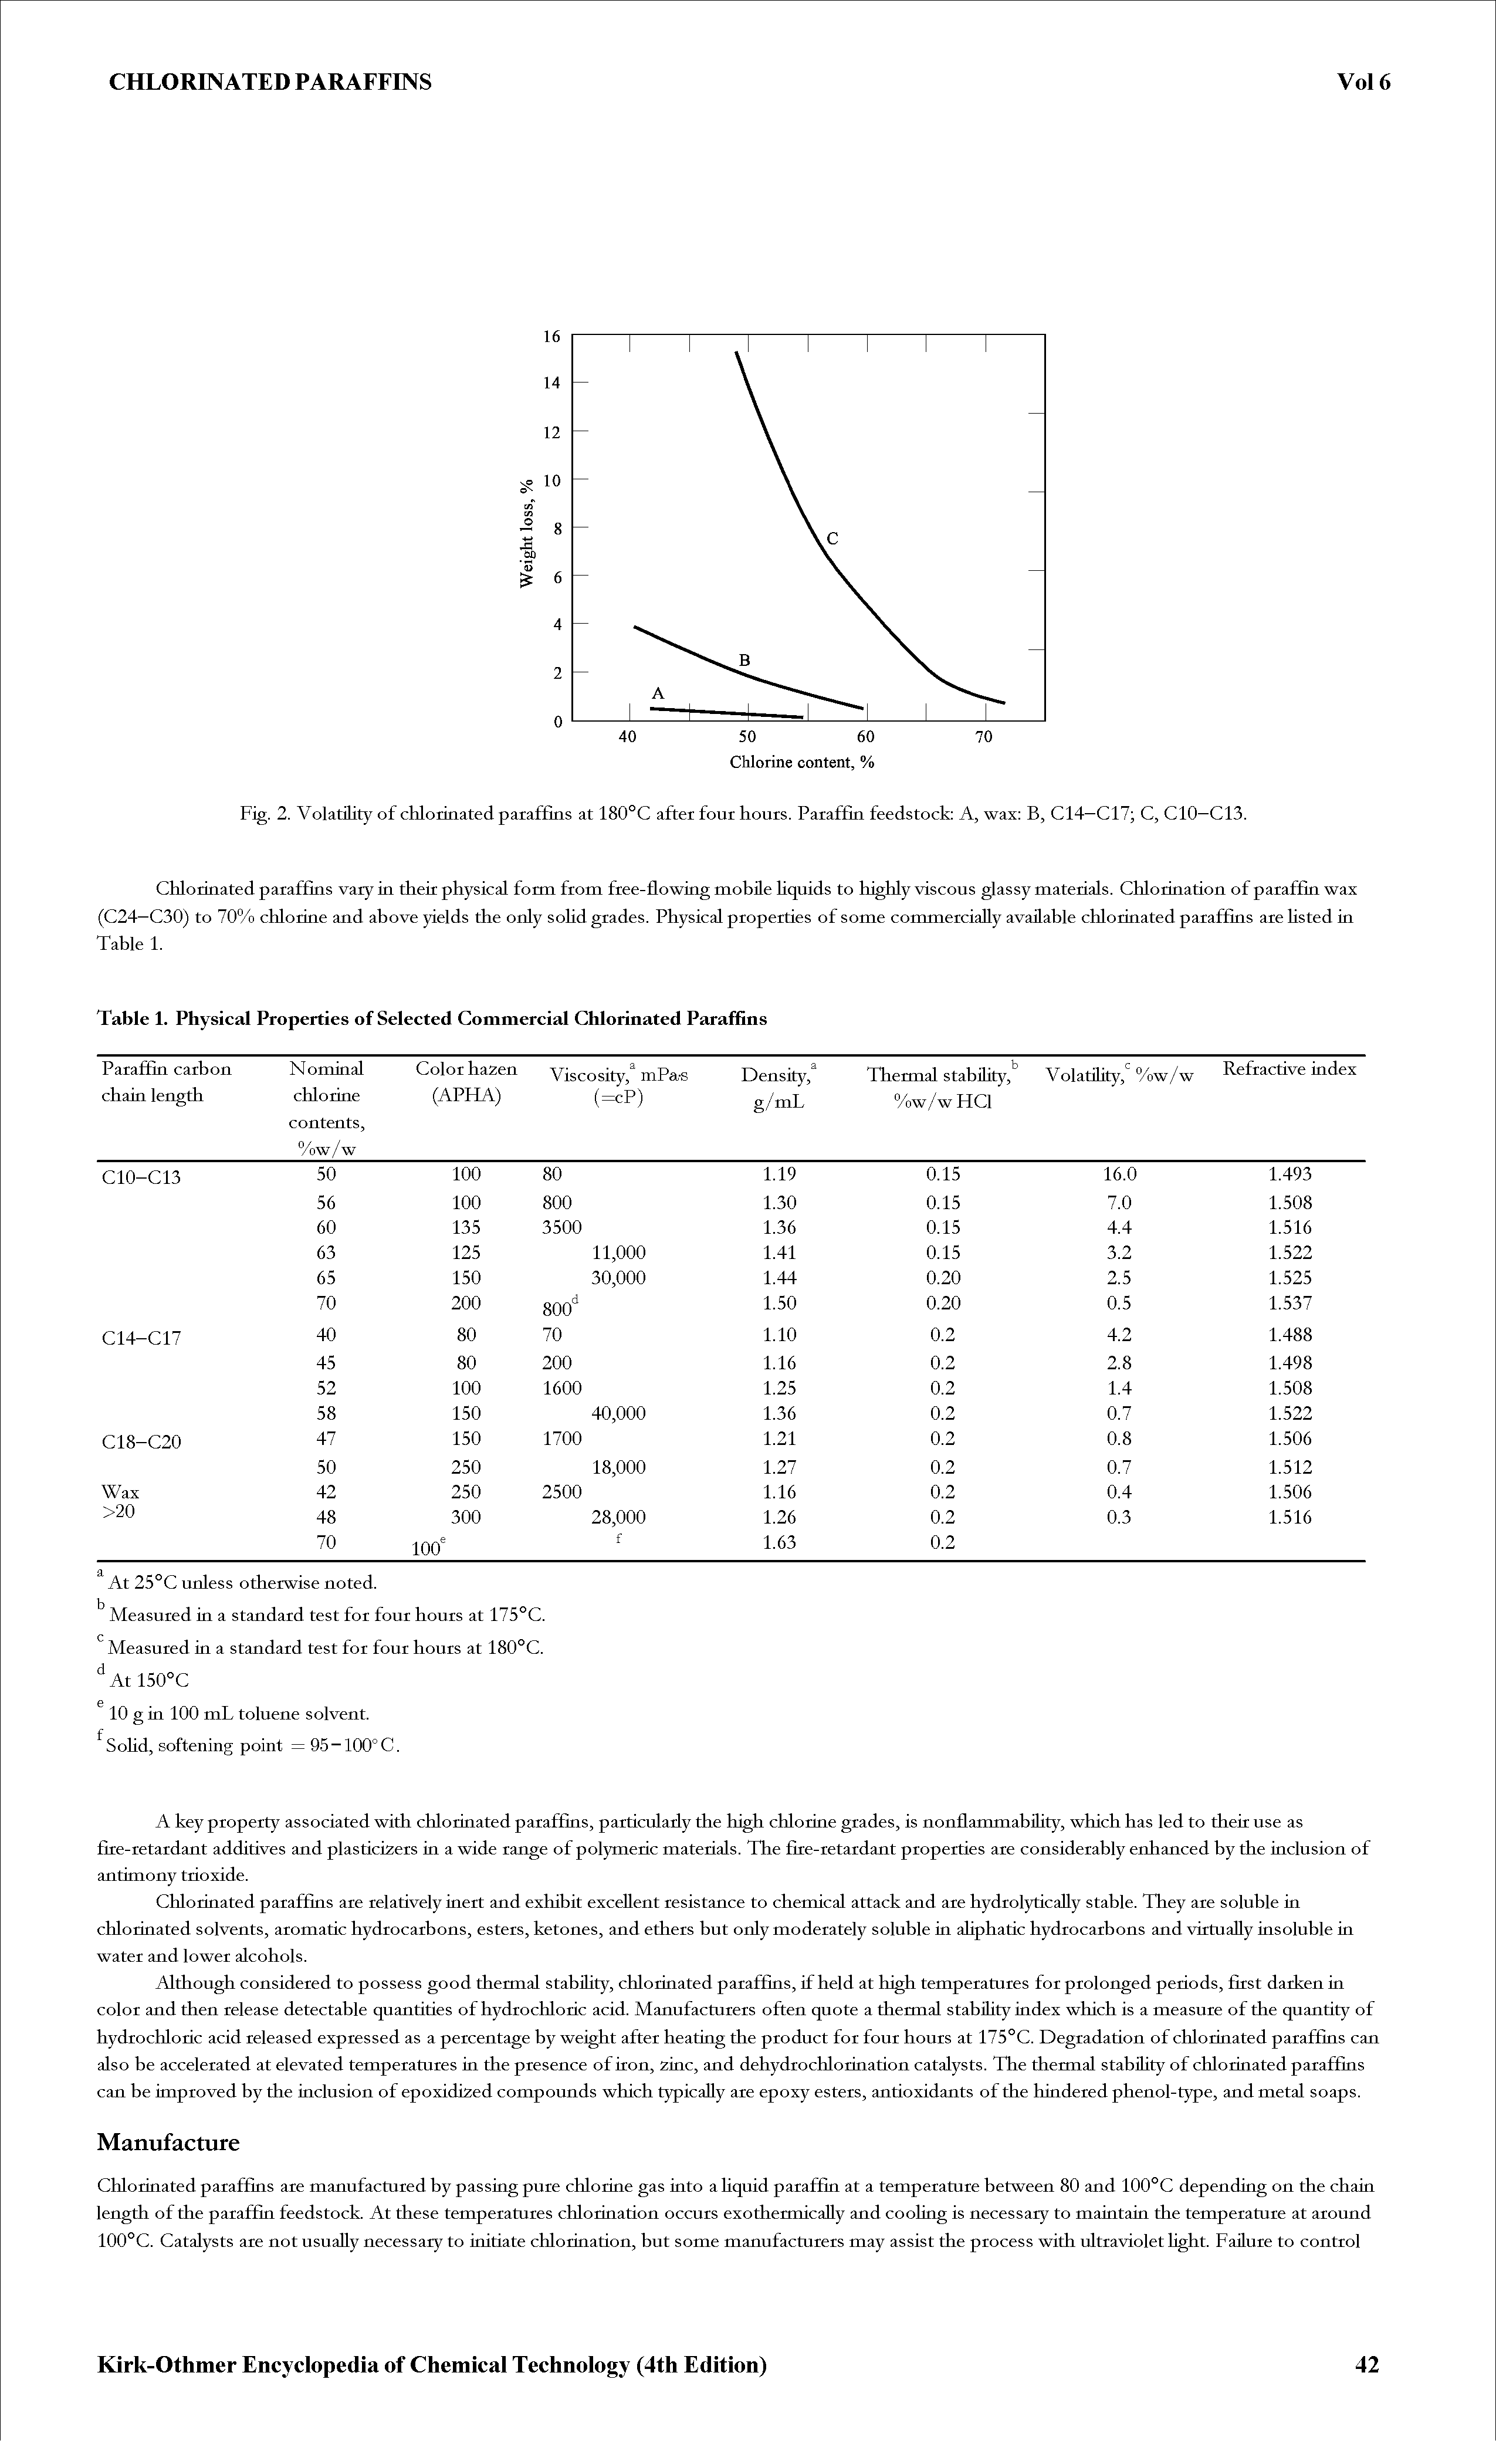 Fig. 2. Volatility of chlorinated paraffins at 180°C after four hours. Paraffin feedstock A, wax B, C14—C17 C, CIO—C13.